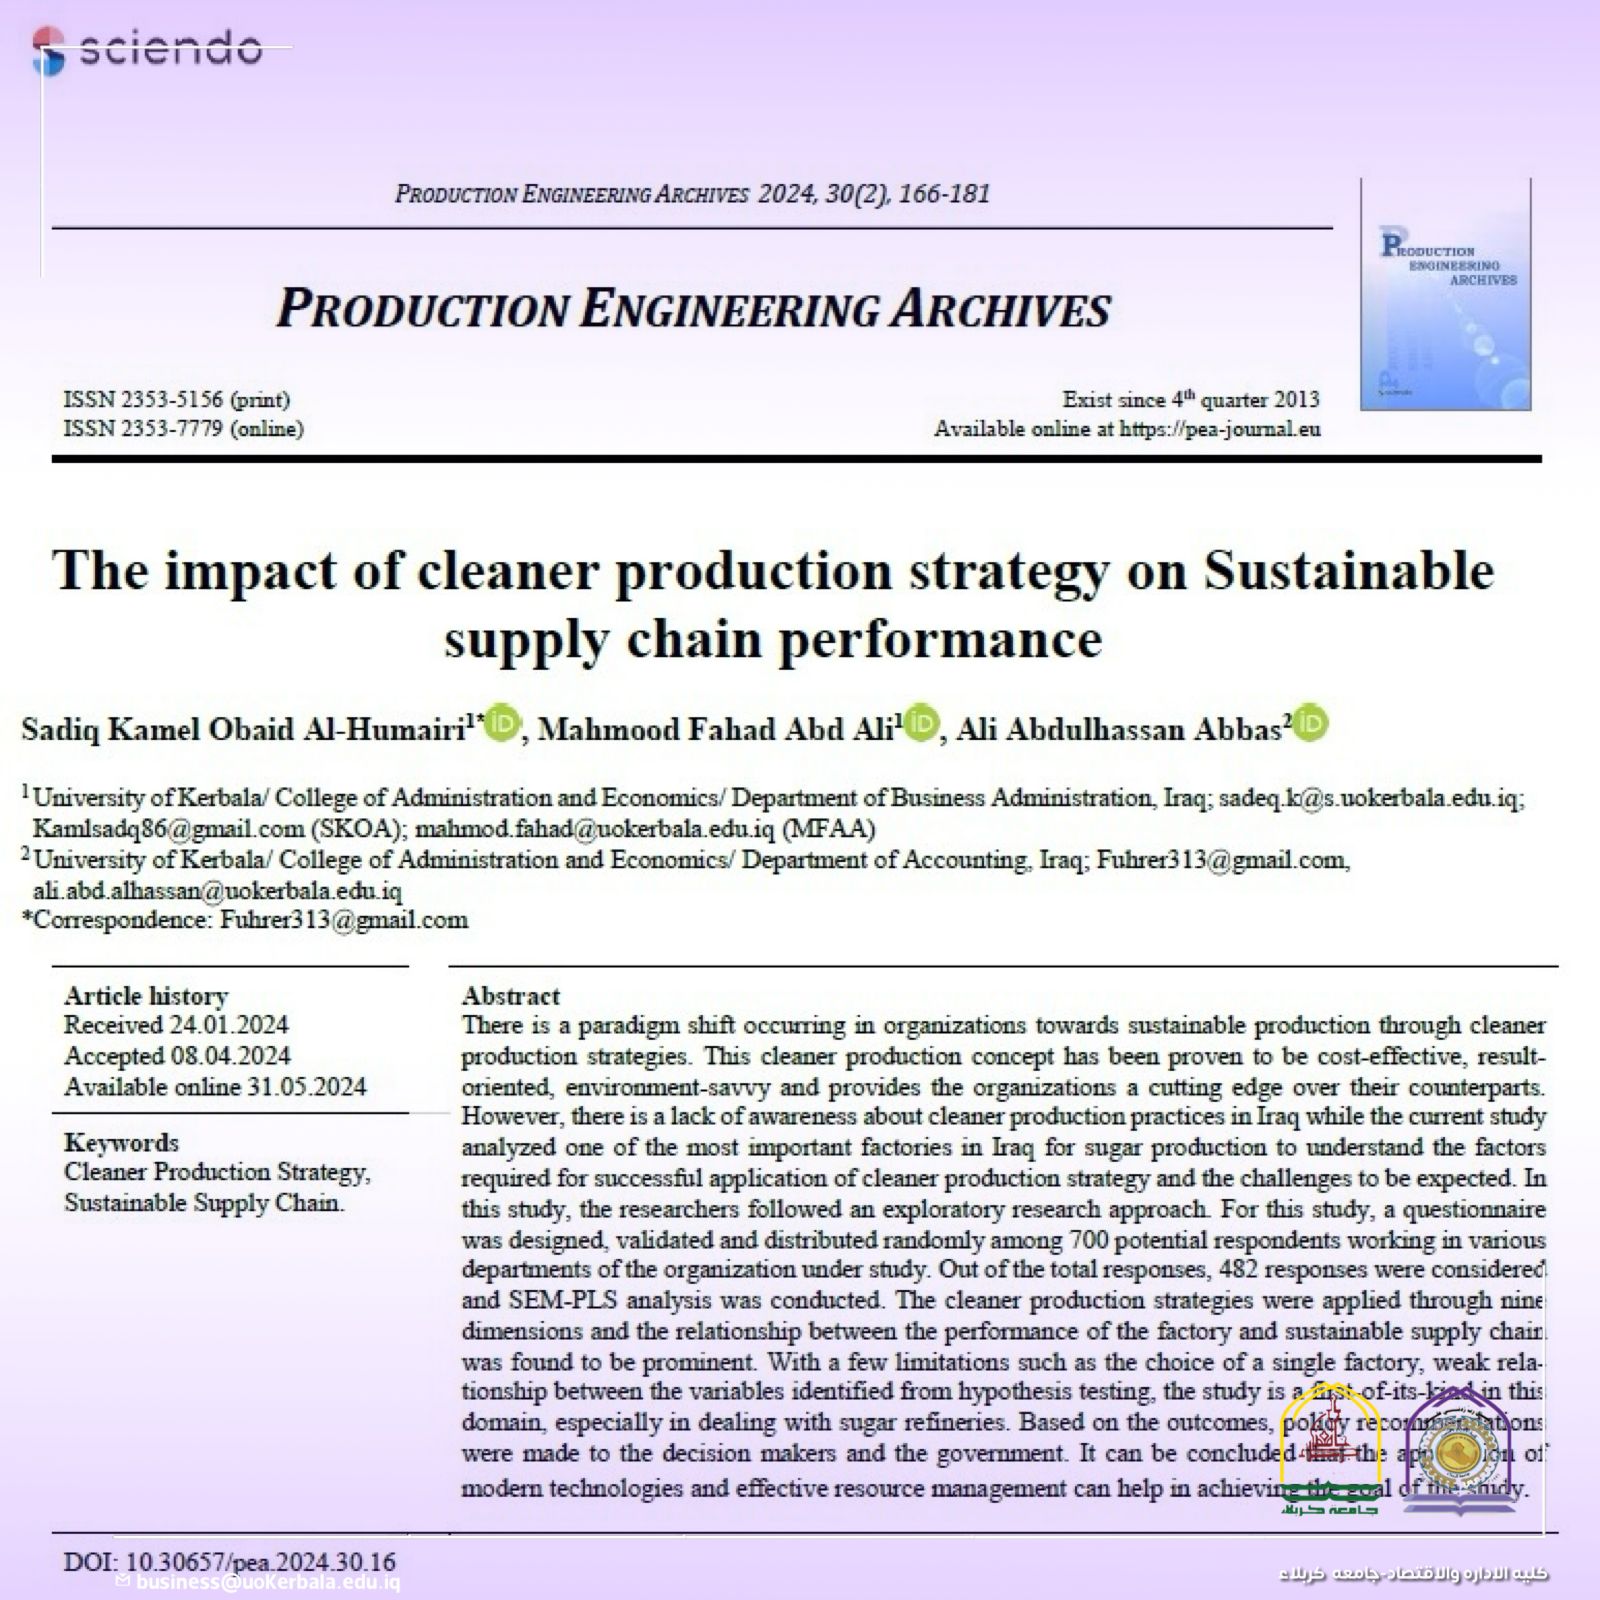 A researcher team From Kerbala University Present A Scientific Research For The impact of cleaner production strategy on Sustainable supply chain performance